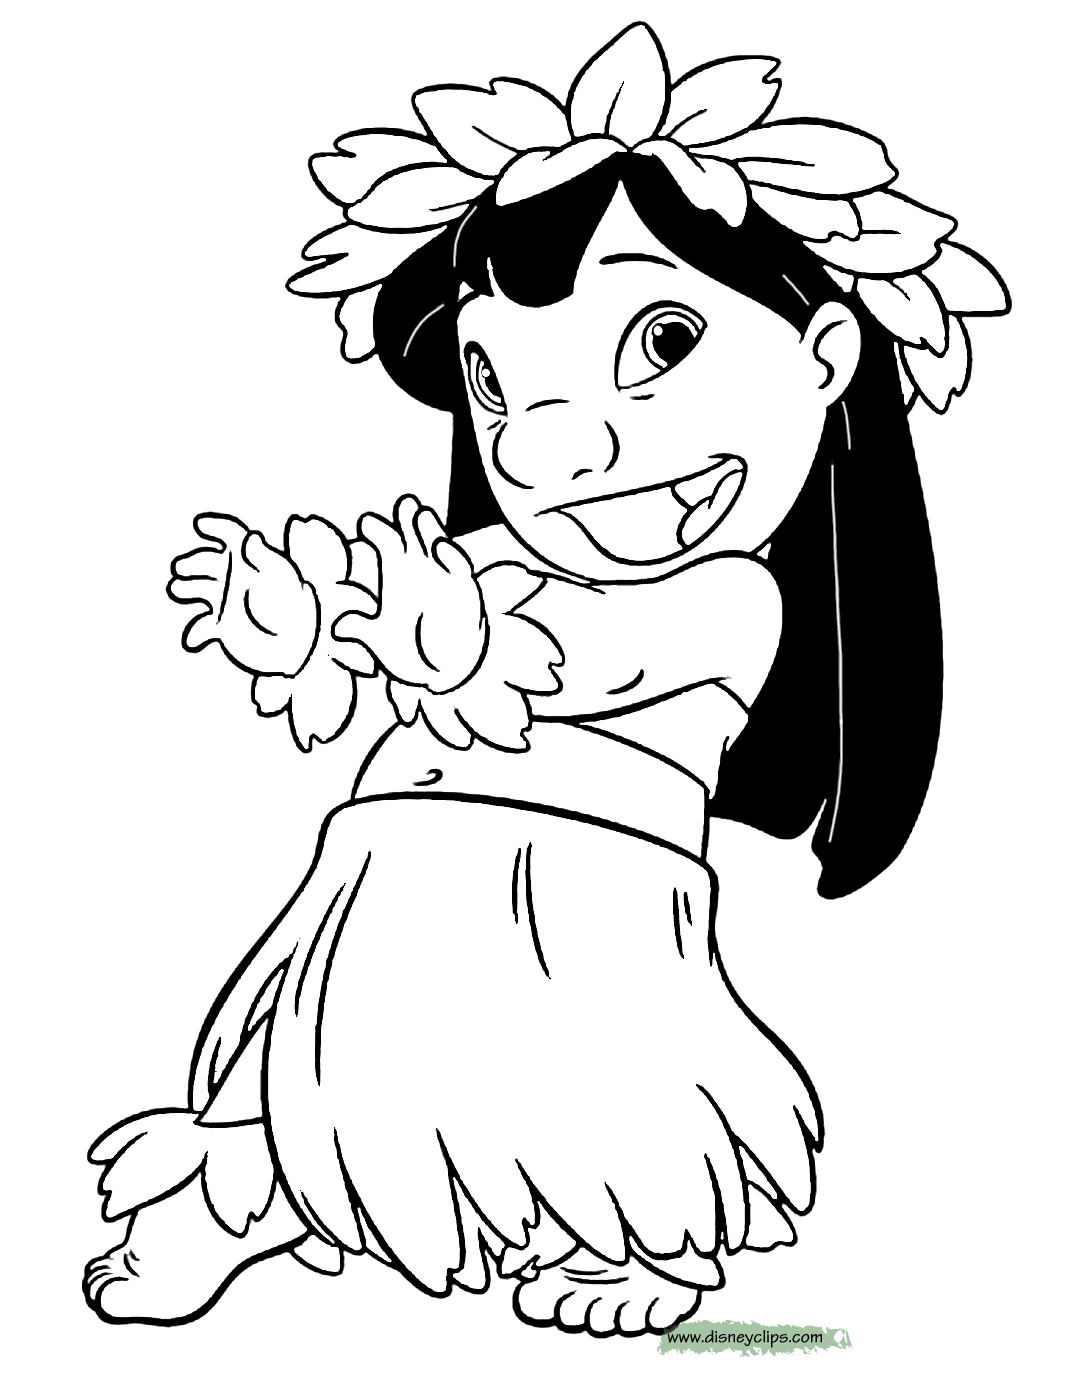 Lilo And Stitch Coloring Page Stitch Coloring Pages Cool Coloring Pages Porn Sex Picture